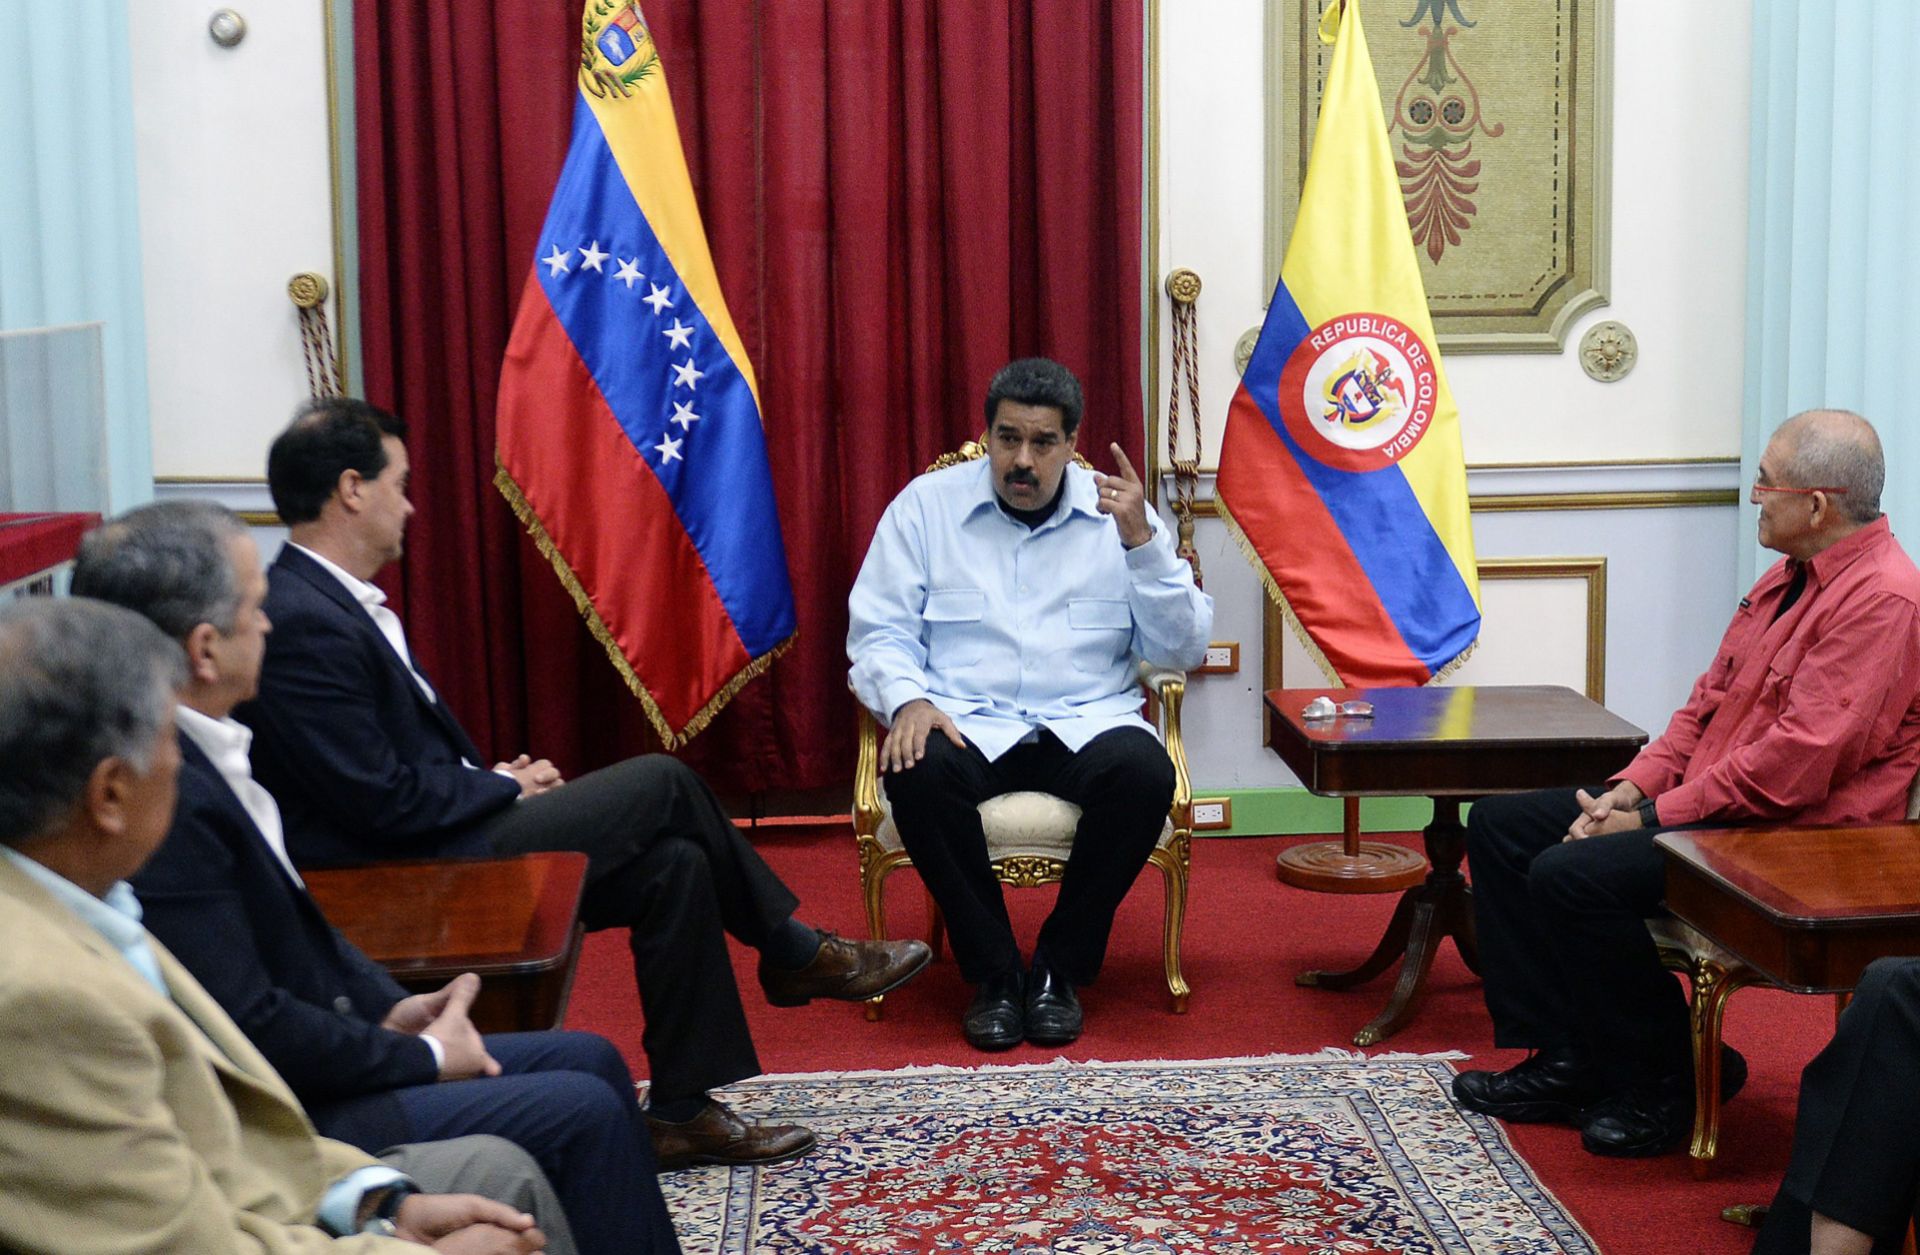 Venezuelan President Nicolas Maduro (C), Colombian lead negotiator Frank Pearl (C-L), and the ELN guerrilla known as Antonio Garcia (C-R) are pictured with members of their delegations at Miraflores presidential palace in Caracas on March 30.